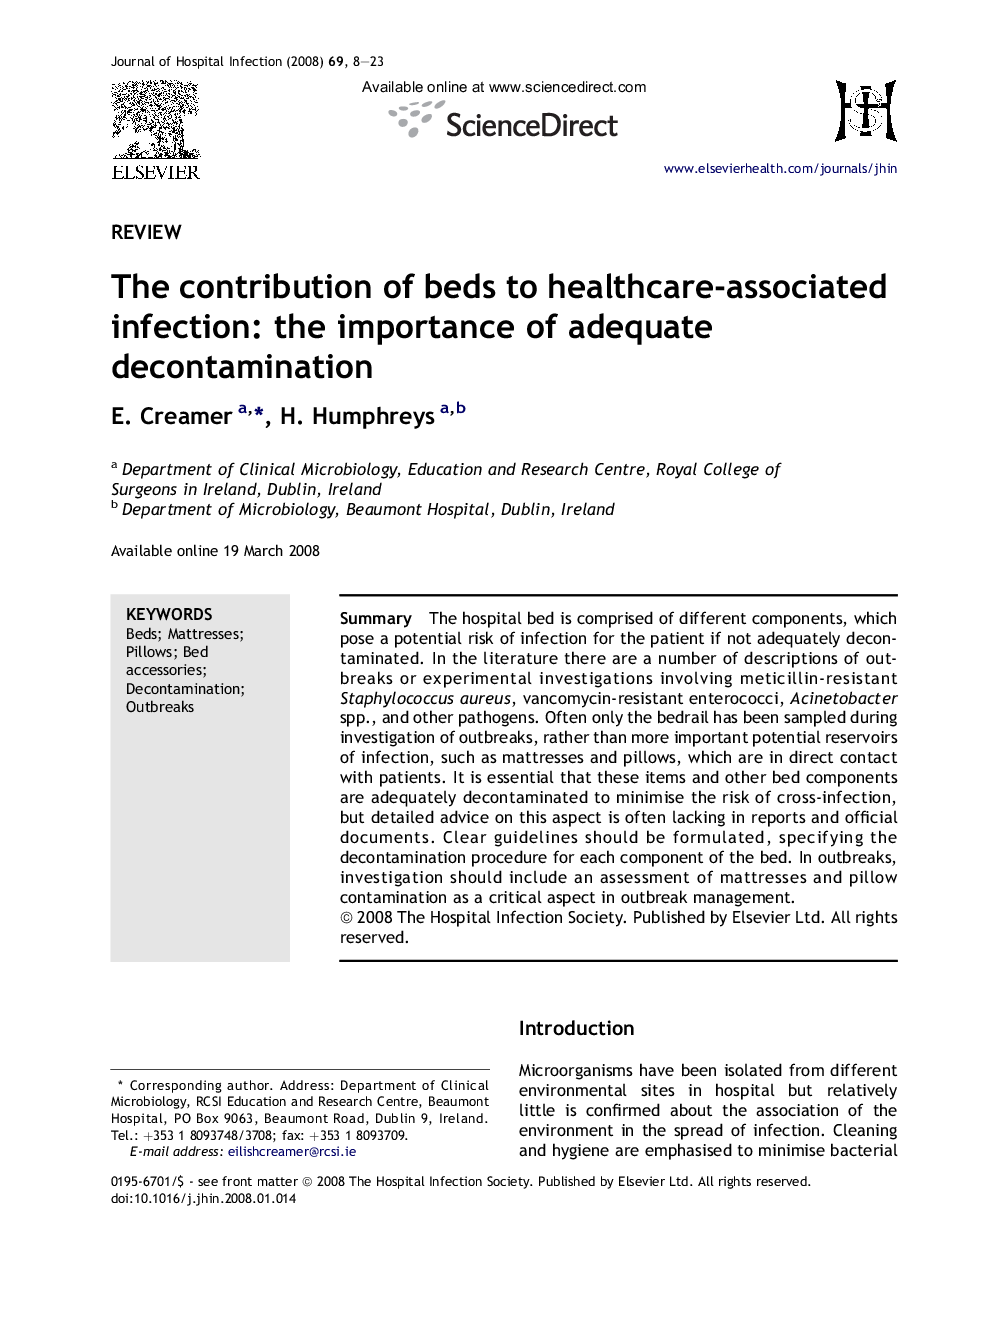 The contribution of beds to healthcare-associated infection: the importance of adequate decontamination